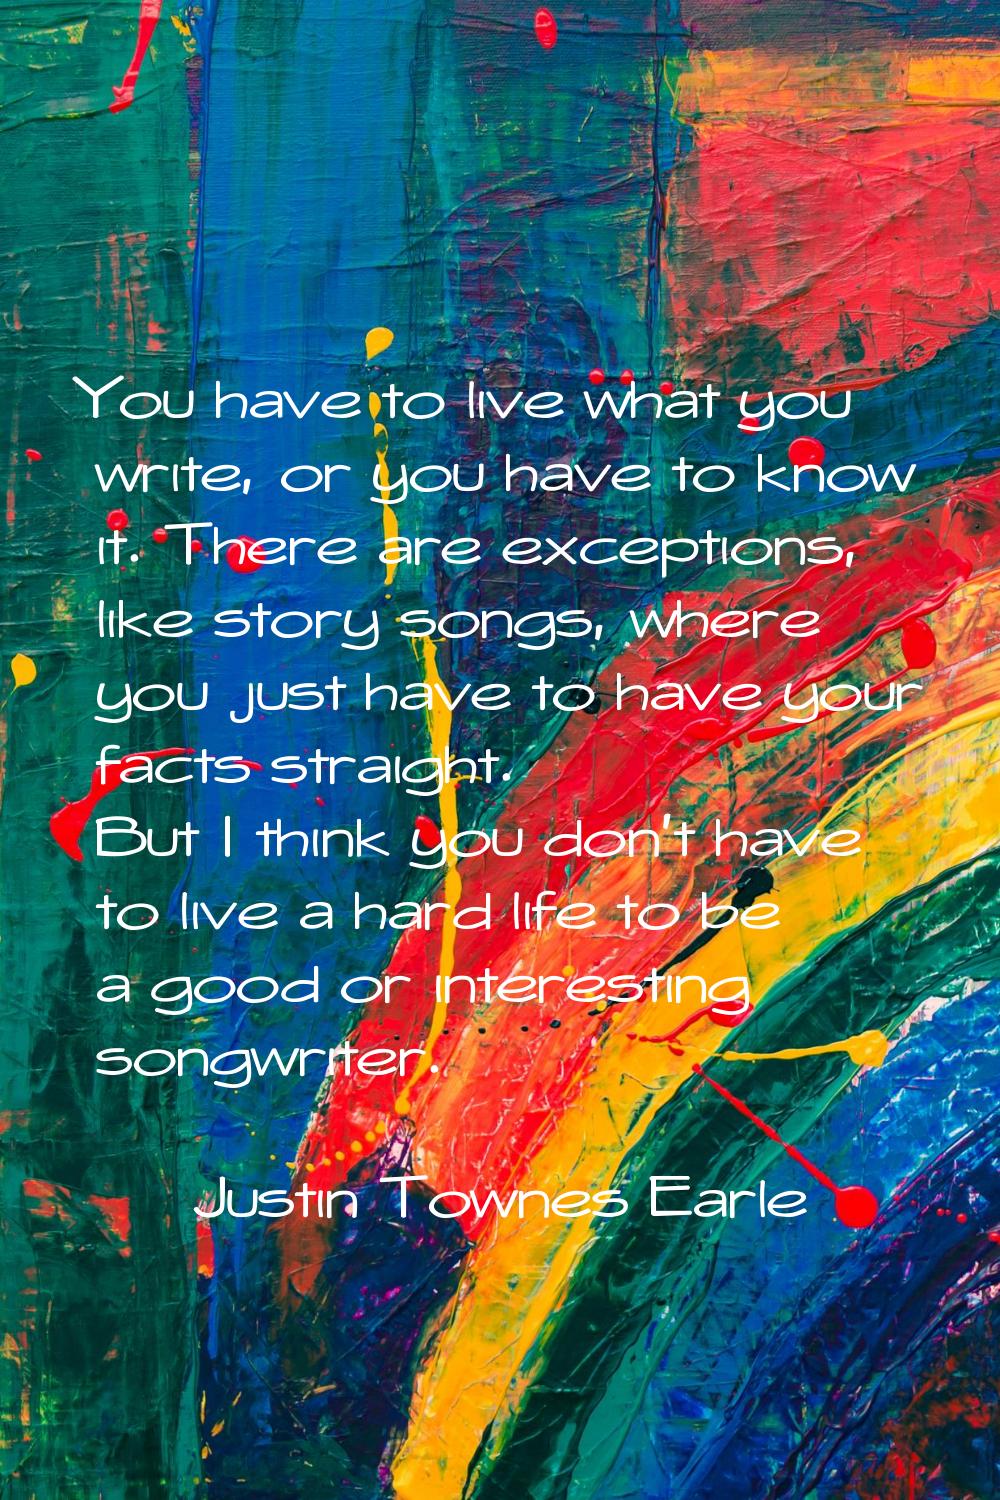 You have to live what you write, or you have to know it. There are exceptions, like story songs, wh